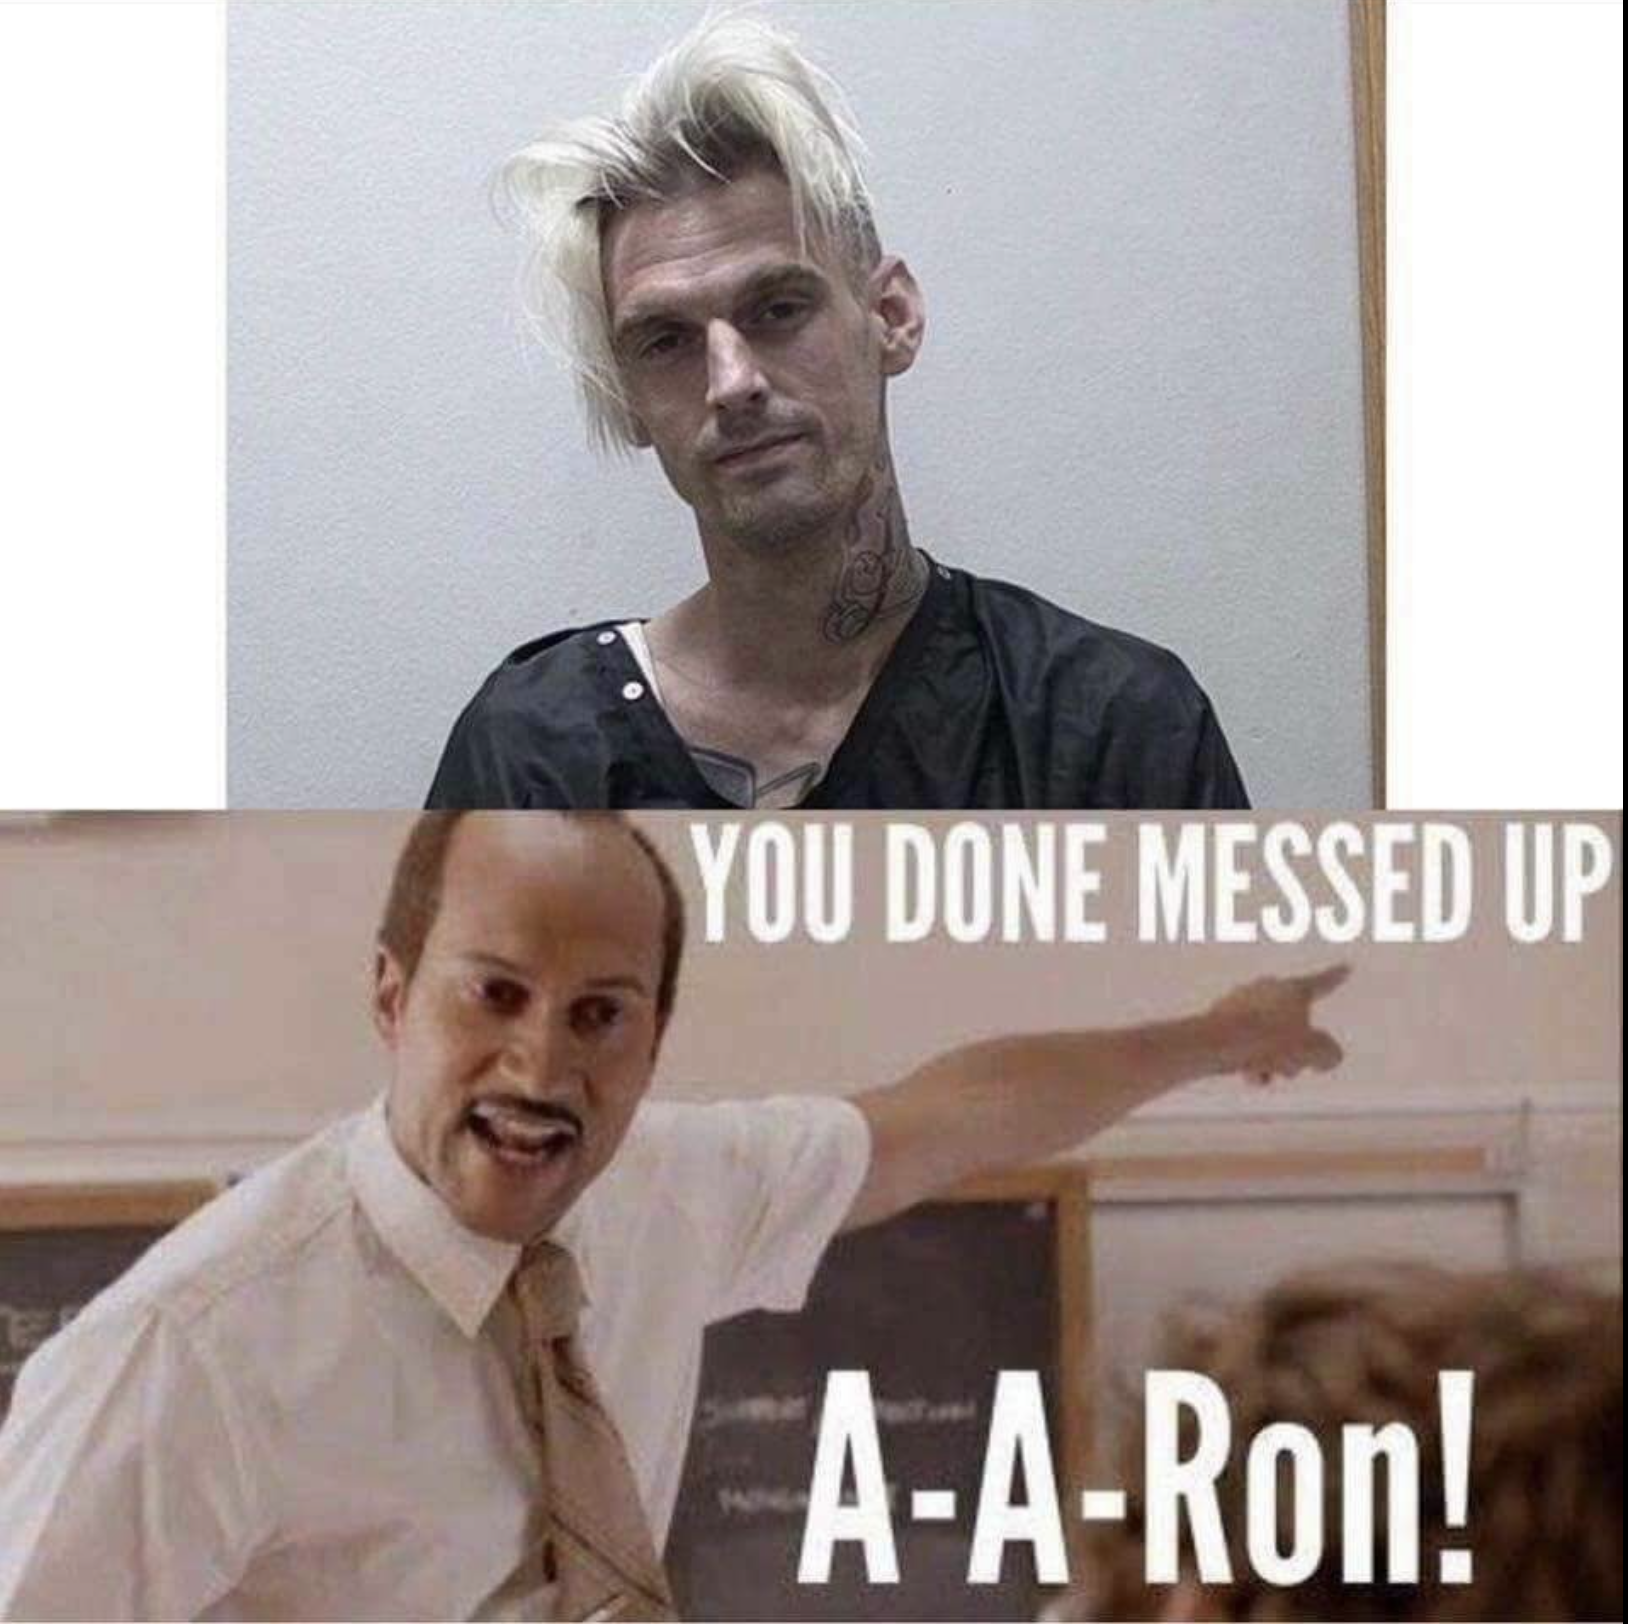 aa ron meme - You Done Messed Up AARon!